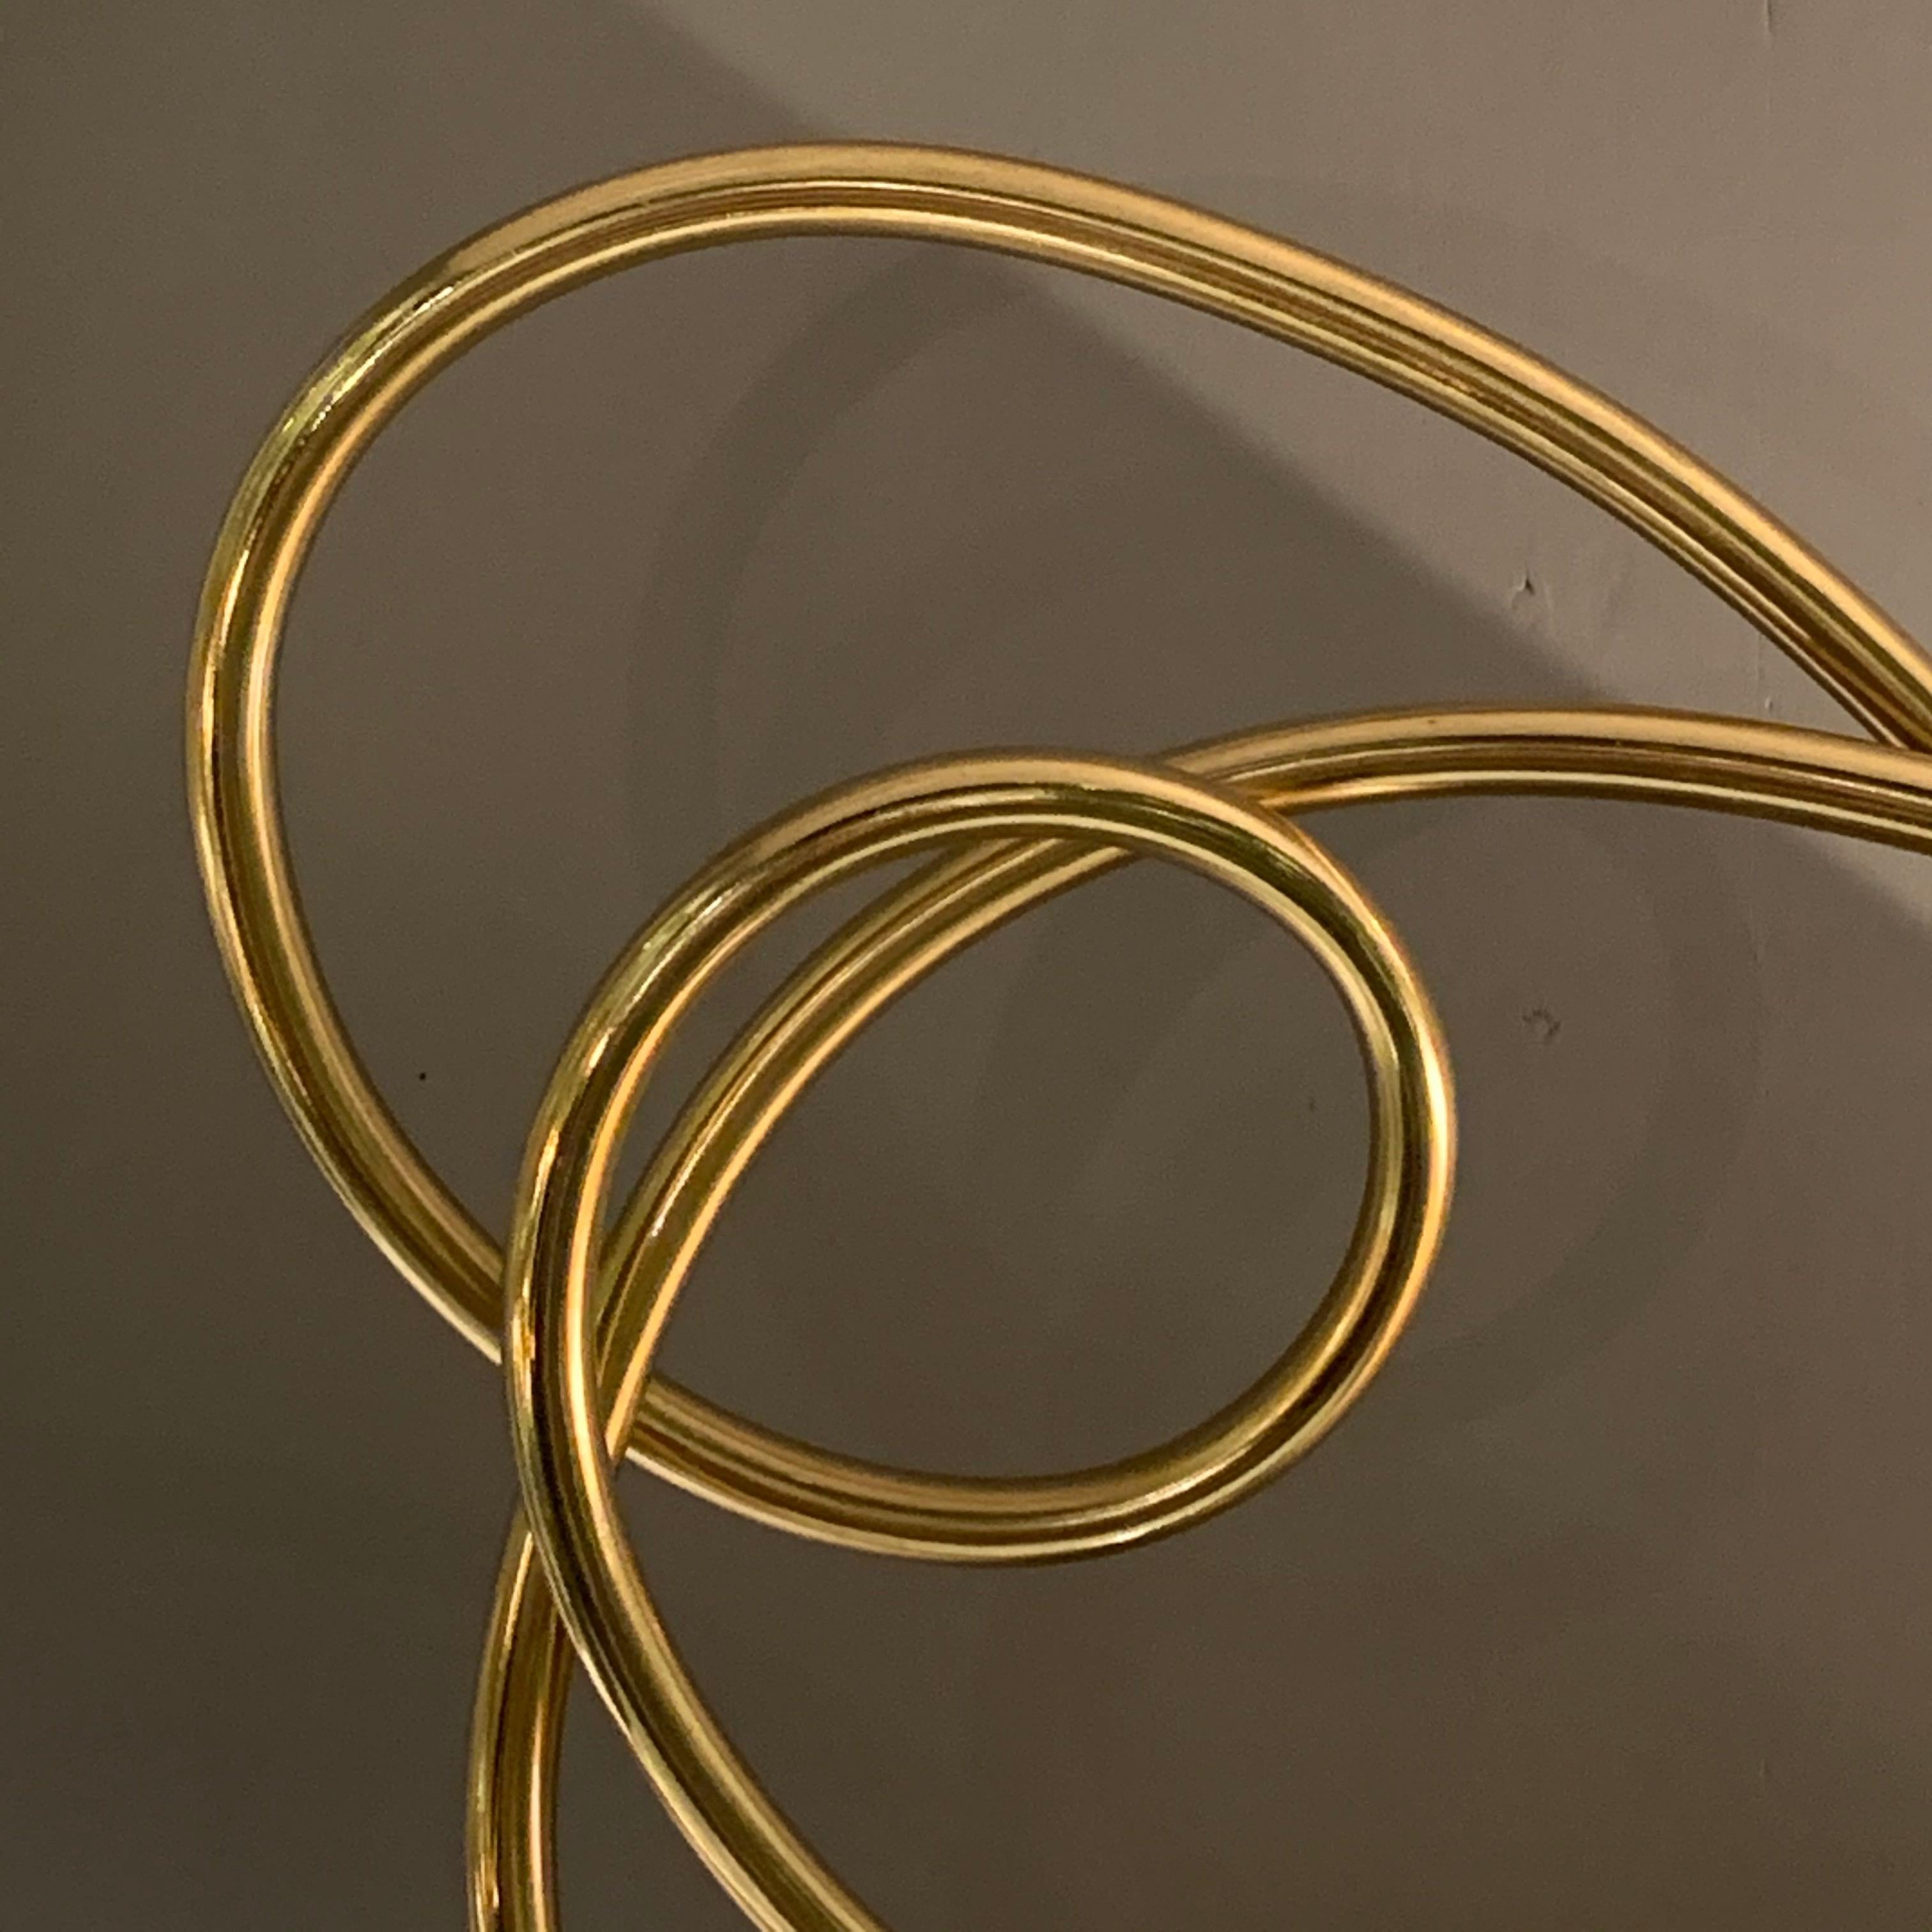 The free form thin ribbon shaped brass curves around to form multiple circles.
The sculpture is mounted on a black marble base.
The base measures 3.5